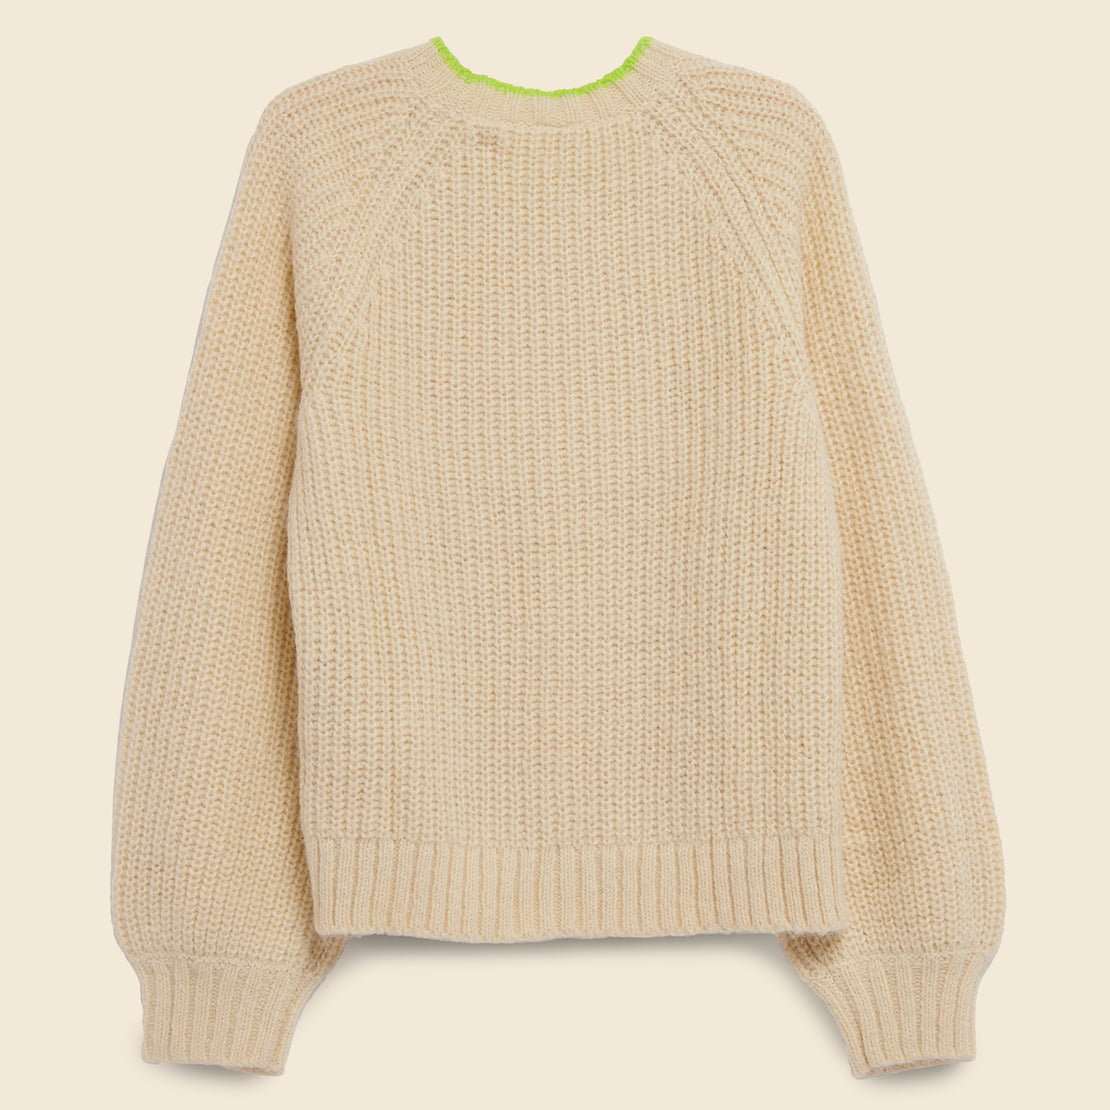 Ava Cable Sweater - Almond Milk - Levis Premium - STAG Provisions - W - Tops - Sweater